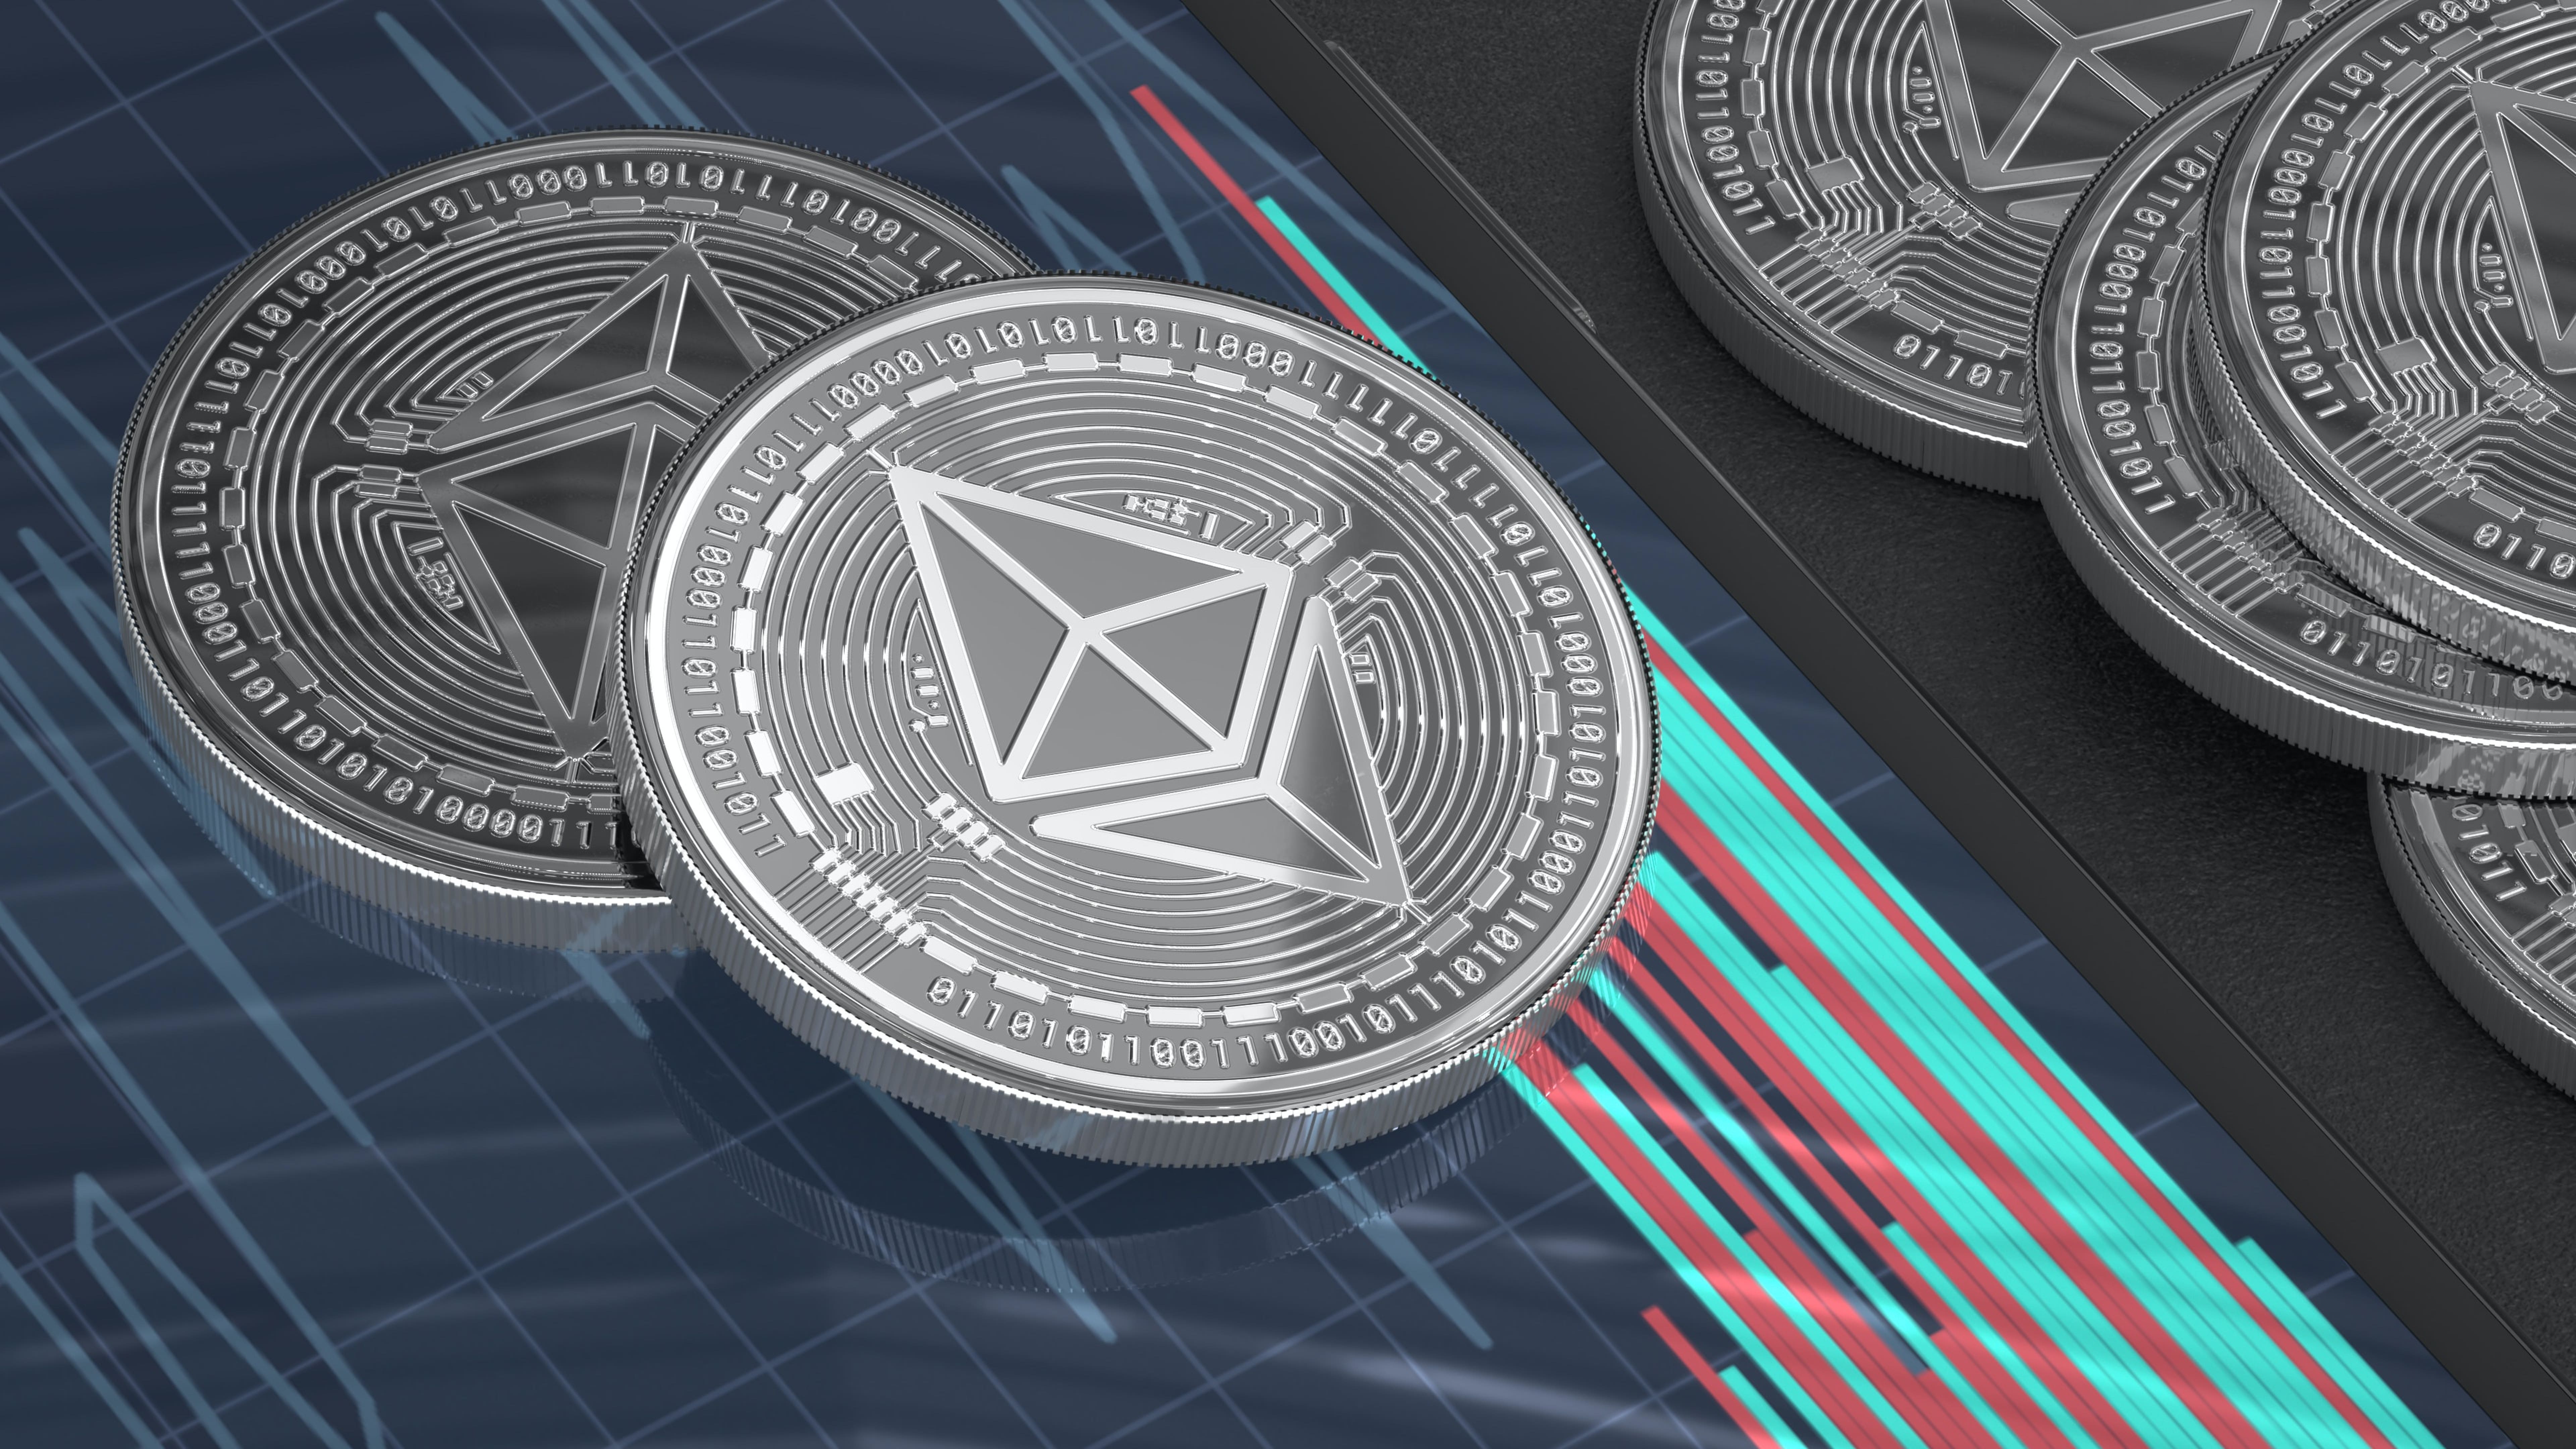 Ethereum Wallet MetaMask Sees 38-Fold Jump In Monthly Active Users Amid Rising NFT Popularity